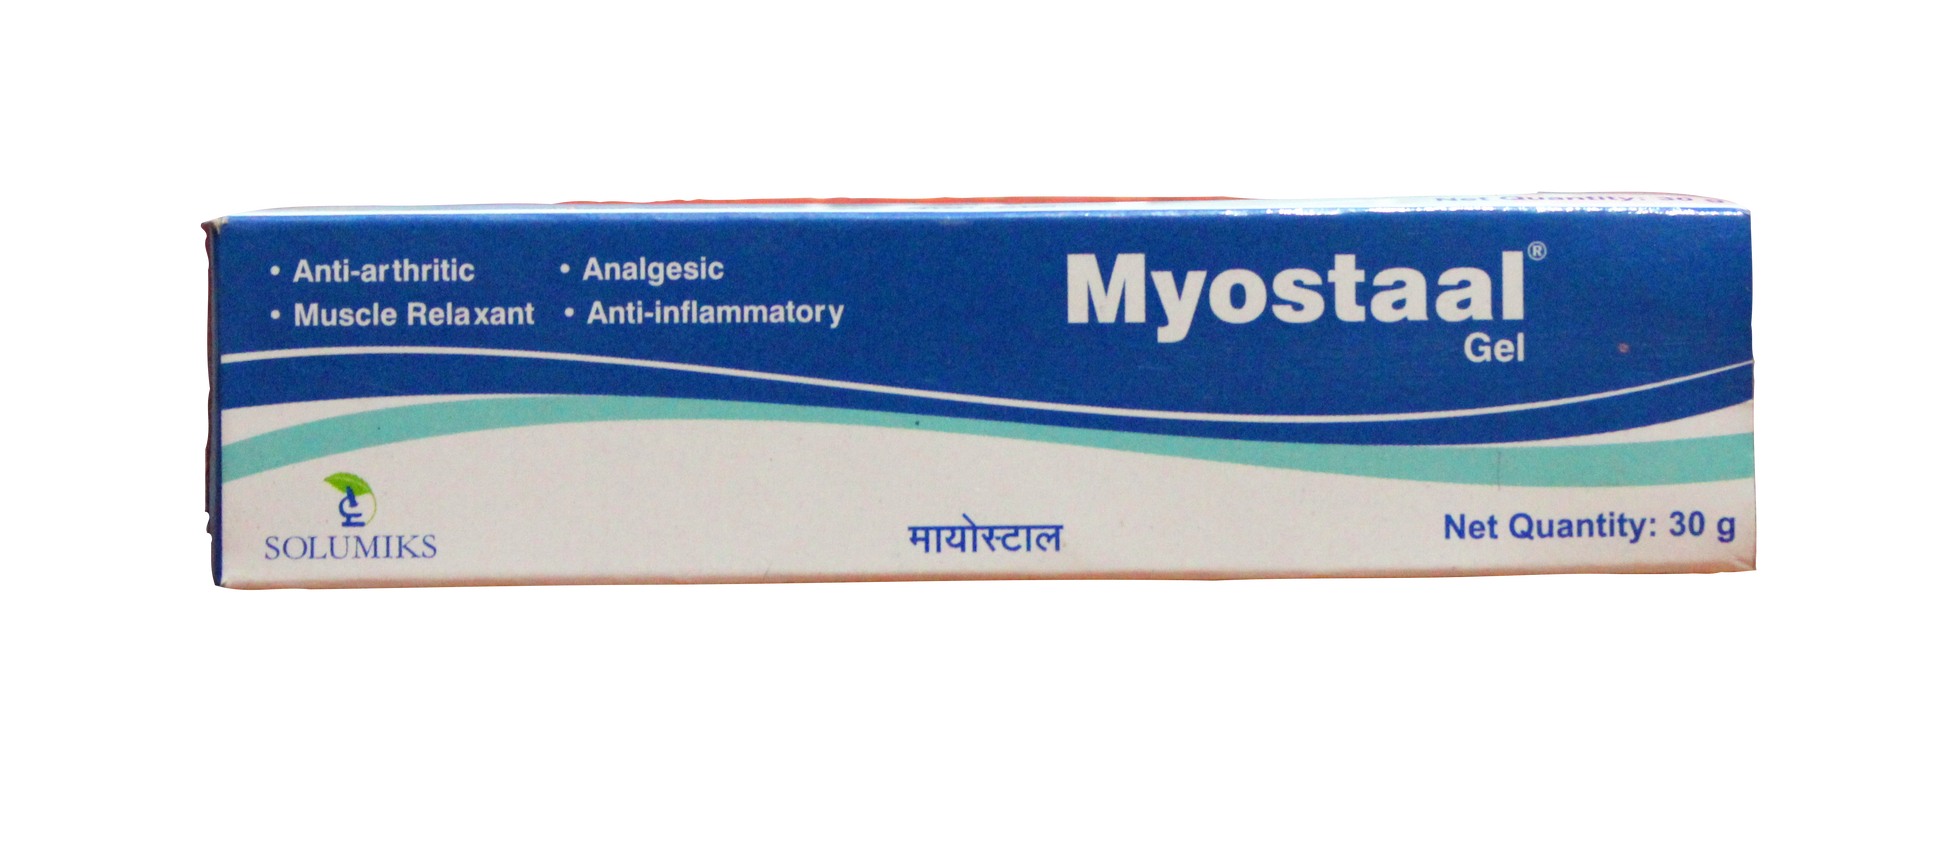 Shop Myostaal gel 30gm at price 115.00 from Solumiks Online - Ayush Care